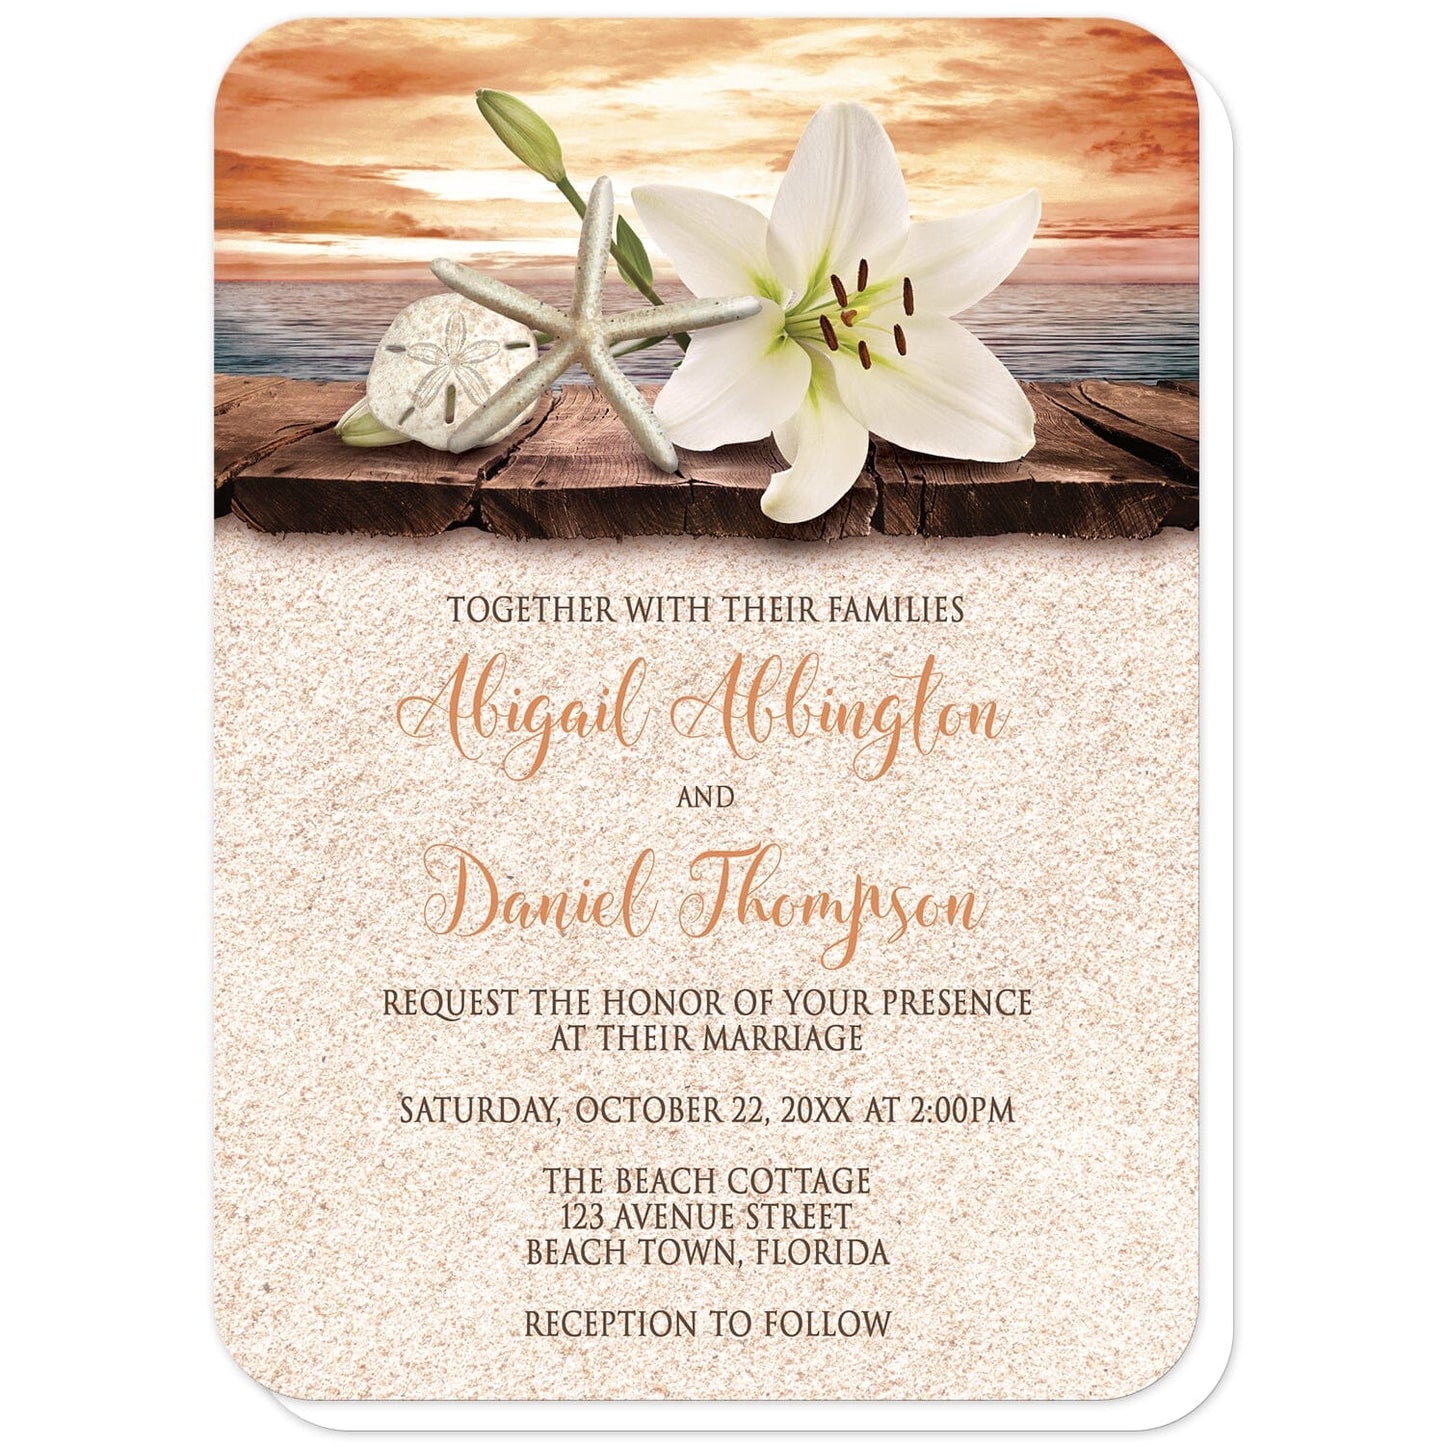 Lily Seashells and Sand Autumn Beach Wedding Invitations (with rounded corners) at Artistically Invited. Lily seashells and sand autumn beach wedding invitations with an elegant white lily, a starfish, and a sand dollar on a rustic wood dock overlooking the open water under a tropical orange sunset sky. Your personalized marriage celebration details are custom printed in dark brown and orange over a beige sand texture background design.